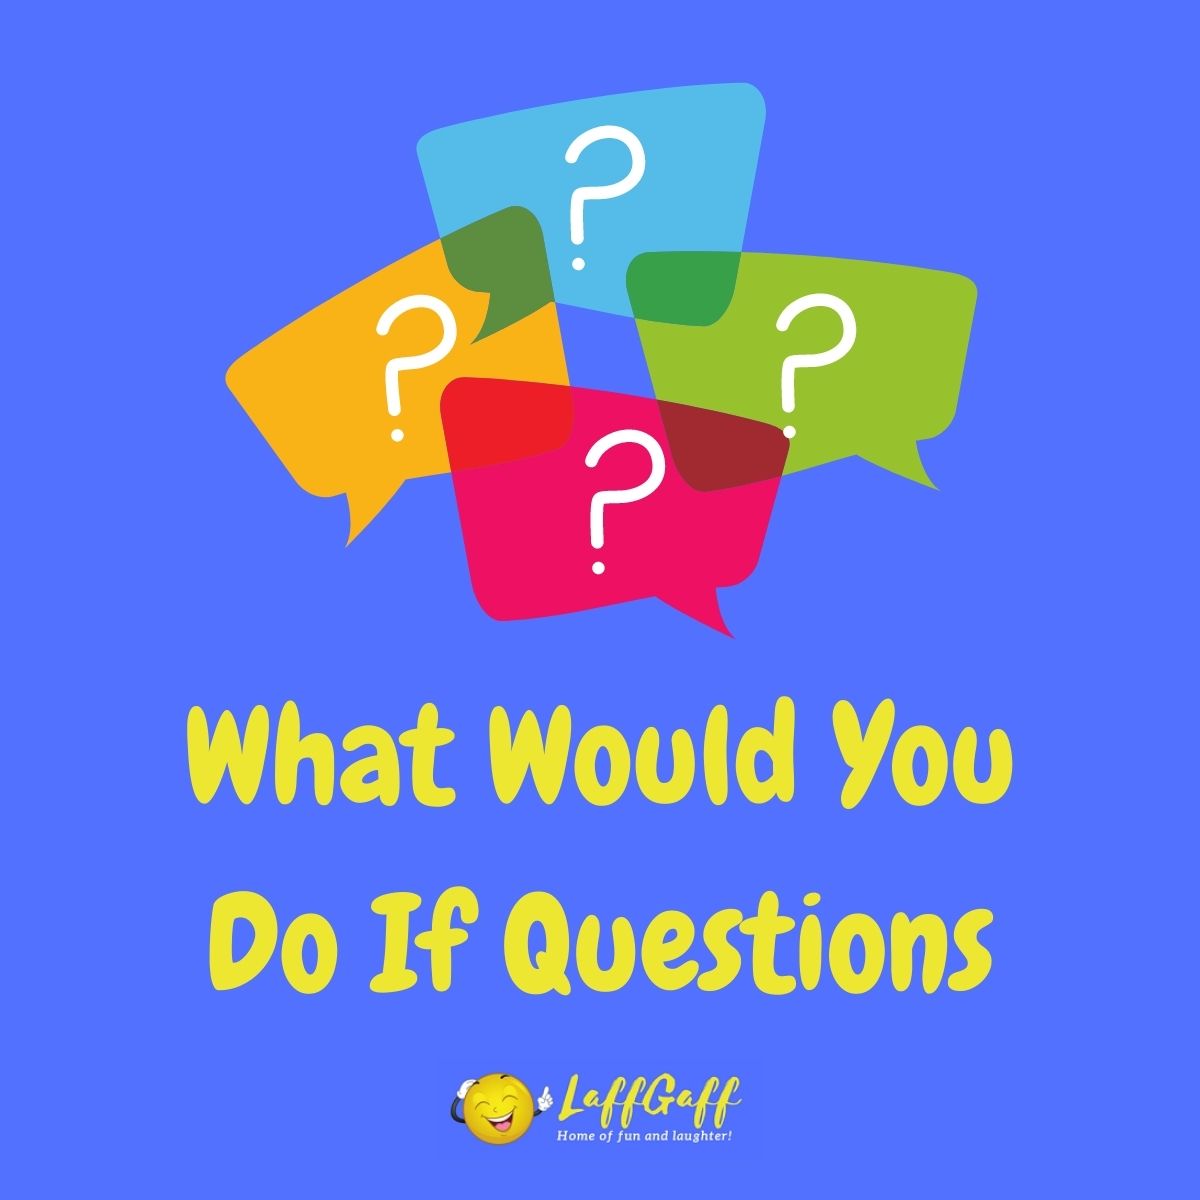 40 Fun What Would You Do If Questions To Make You Think!